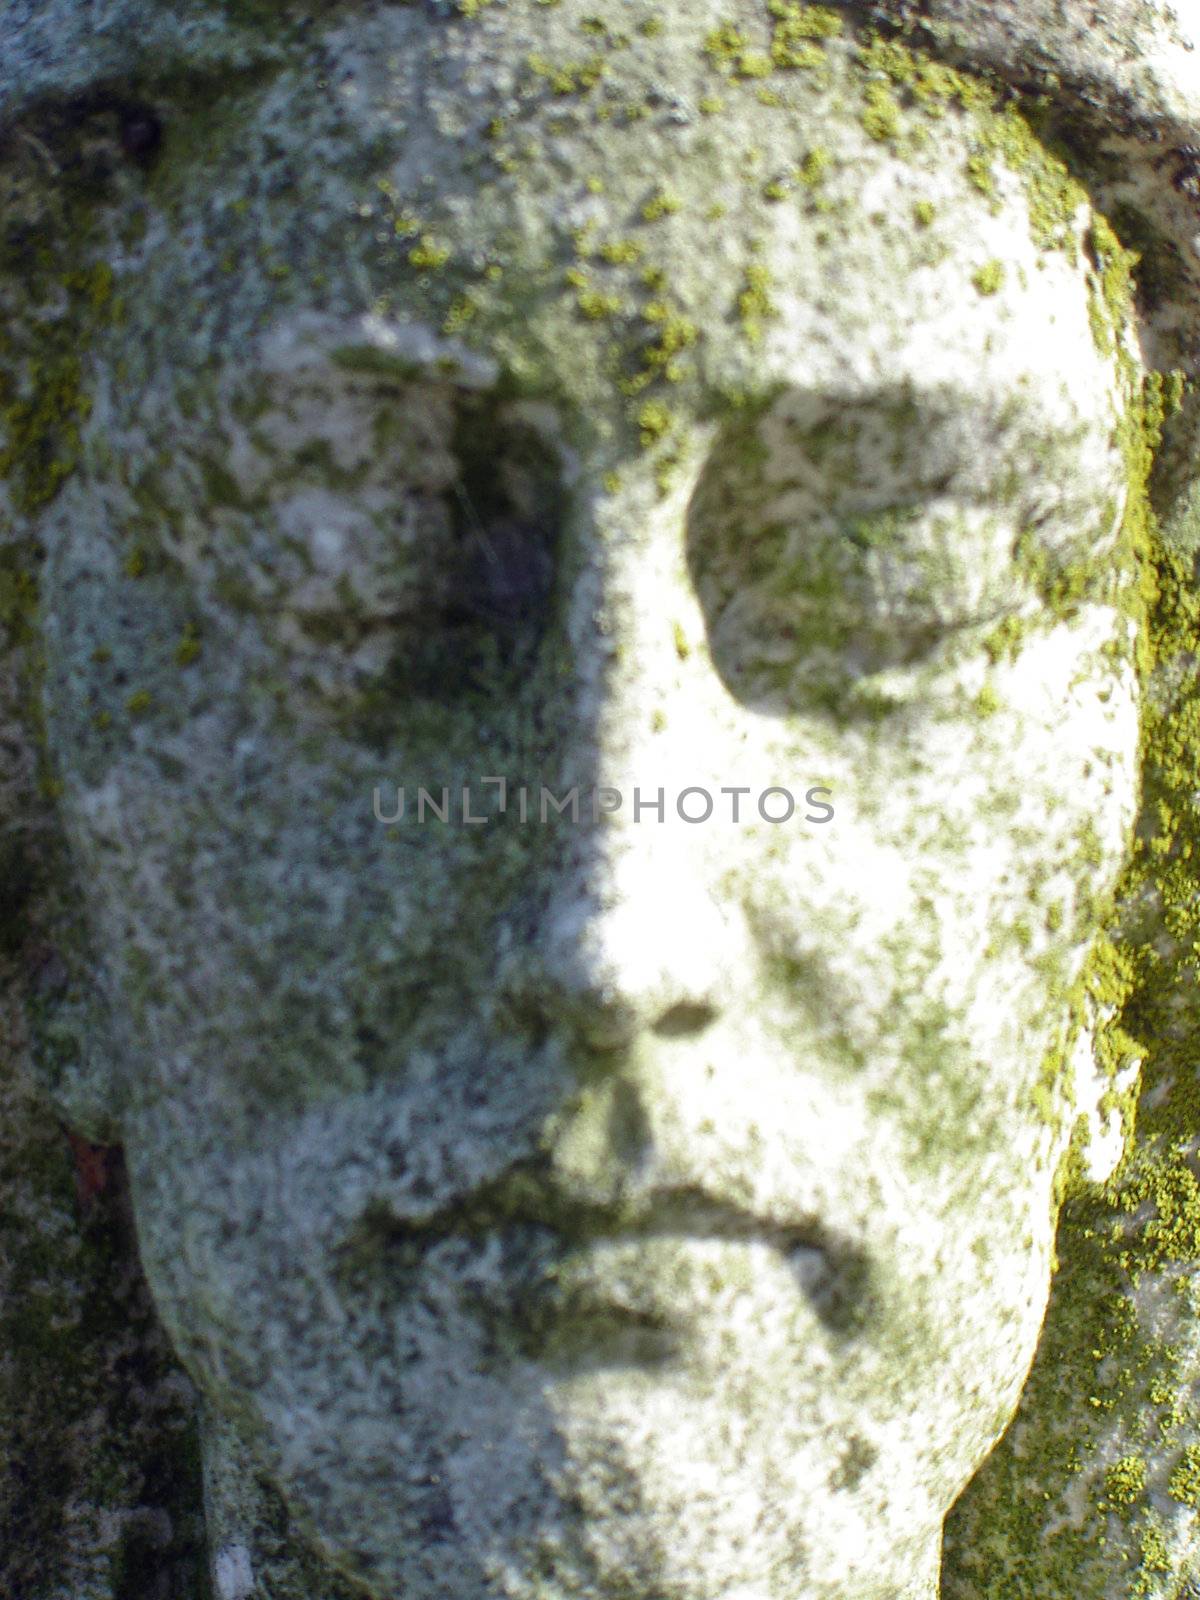 Jesus Statue inside a cemetary - face view by RefocusPhoto